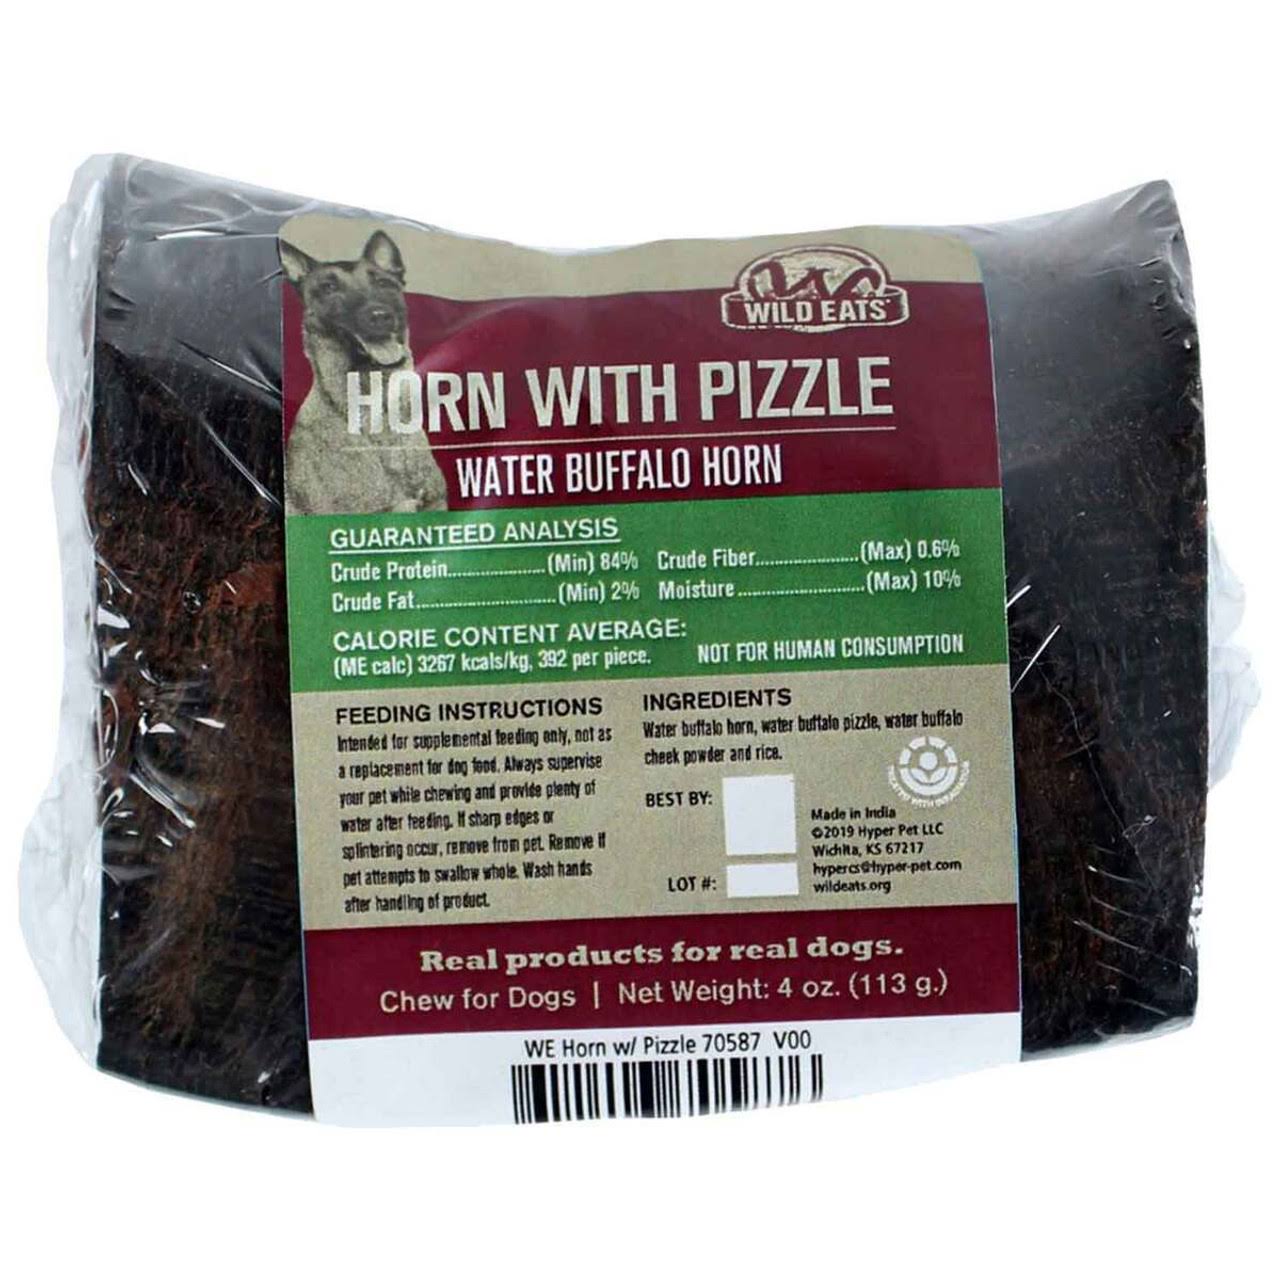 Wild Eats Water Buffalo Horn with Pizzle Dog Treat